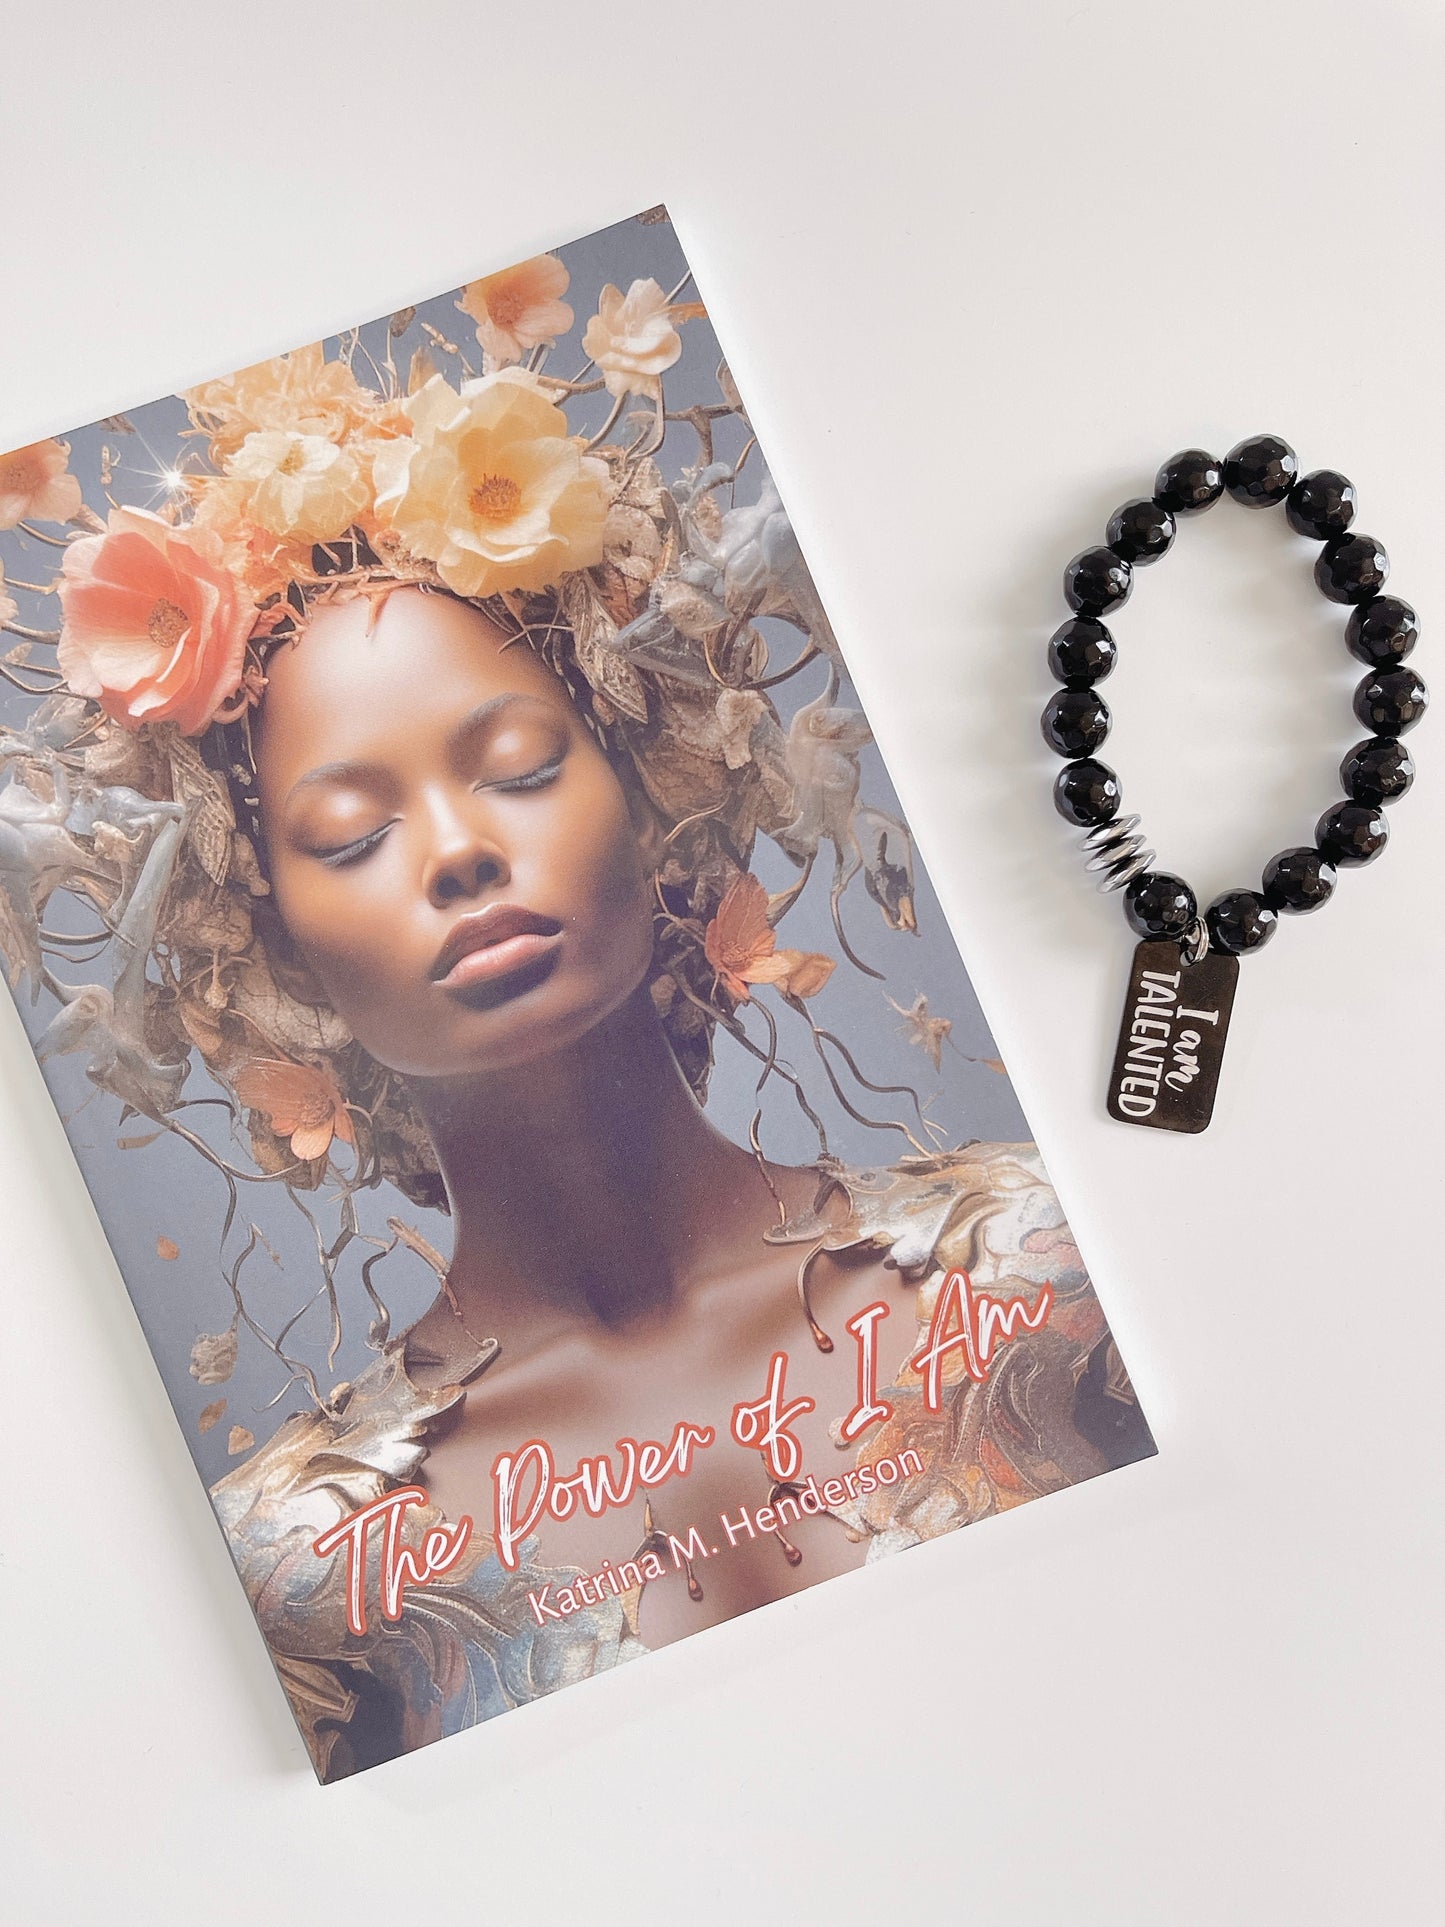 Empower Your Beautiful Duo: The Power of I Am Affirmation Bracelet Set